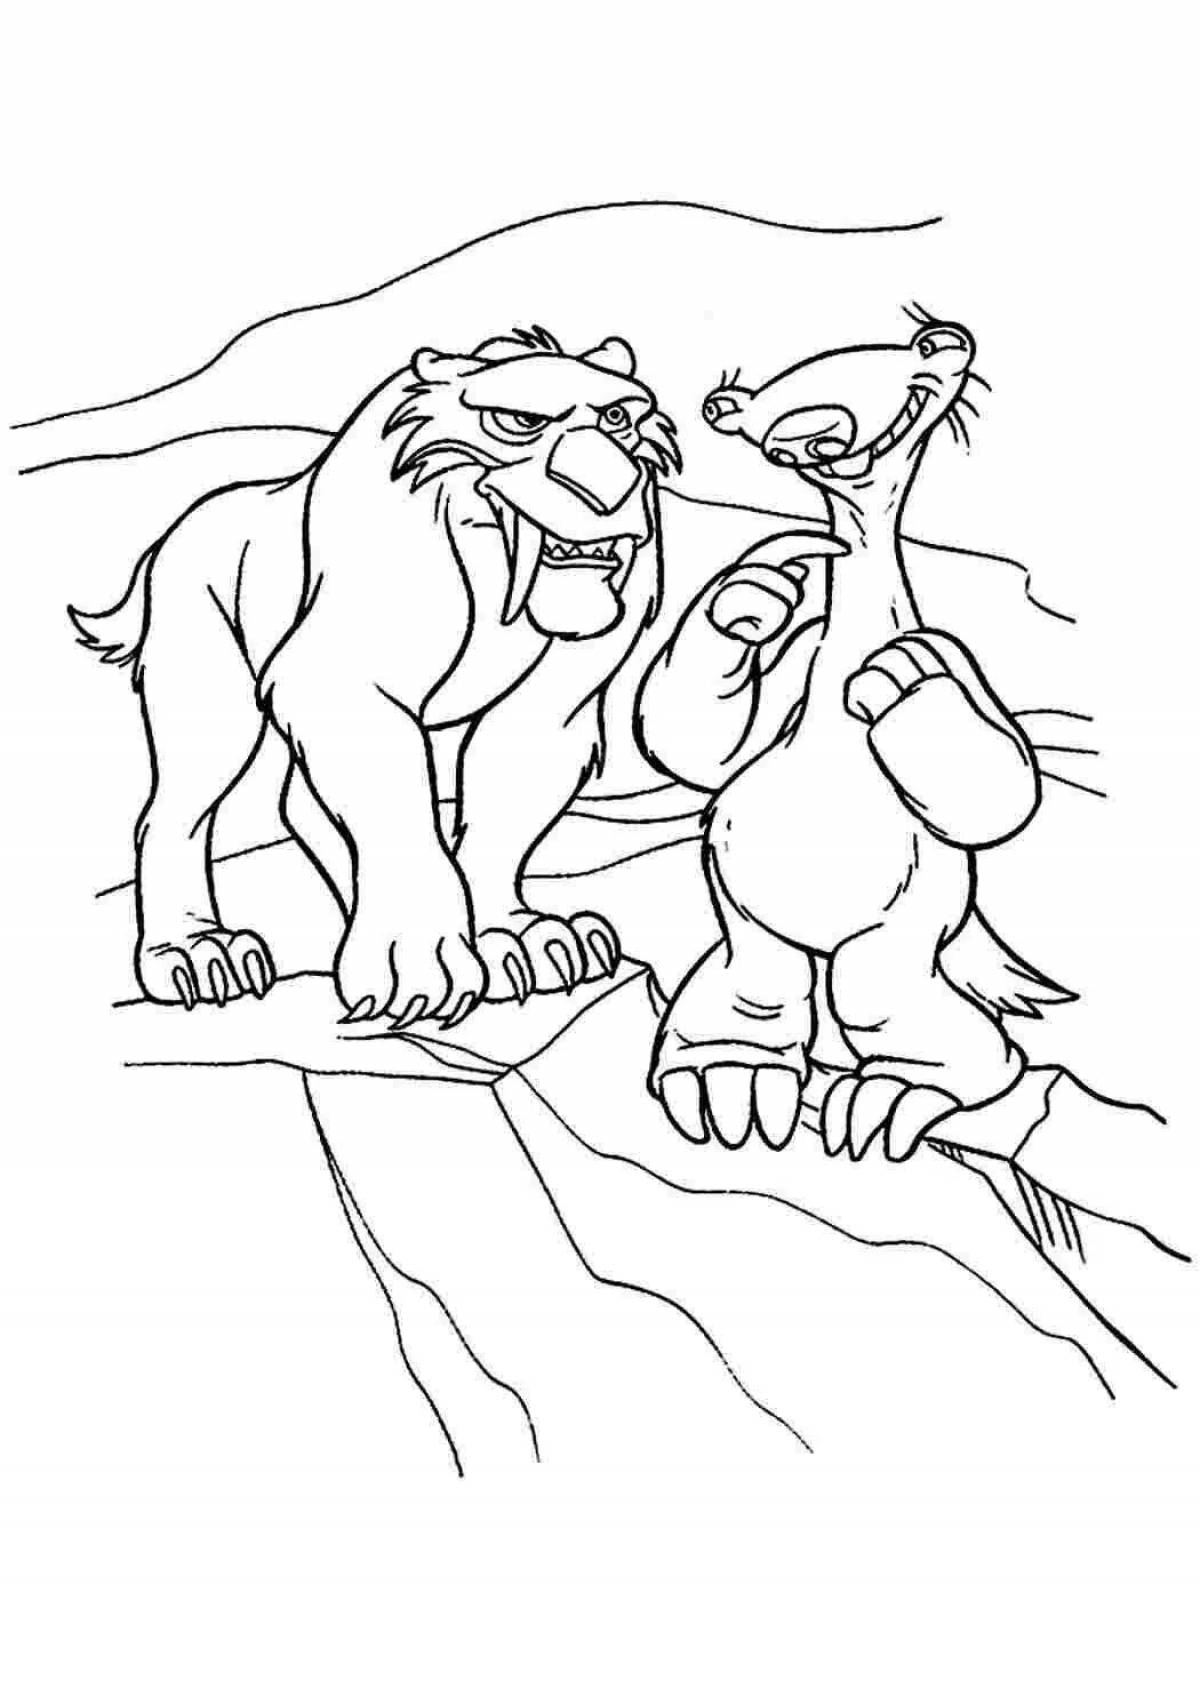 Diego's incredible ice age coloring book